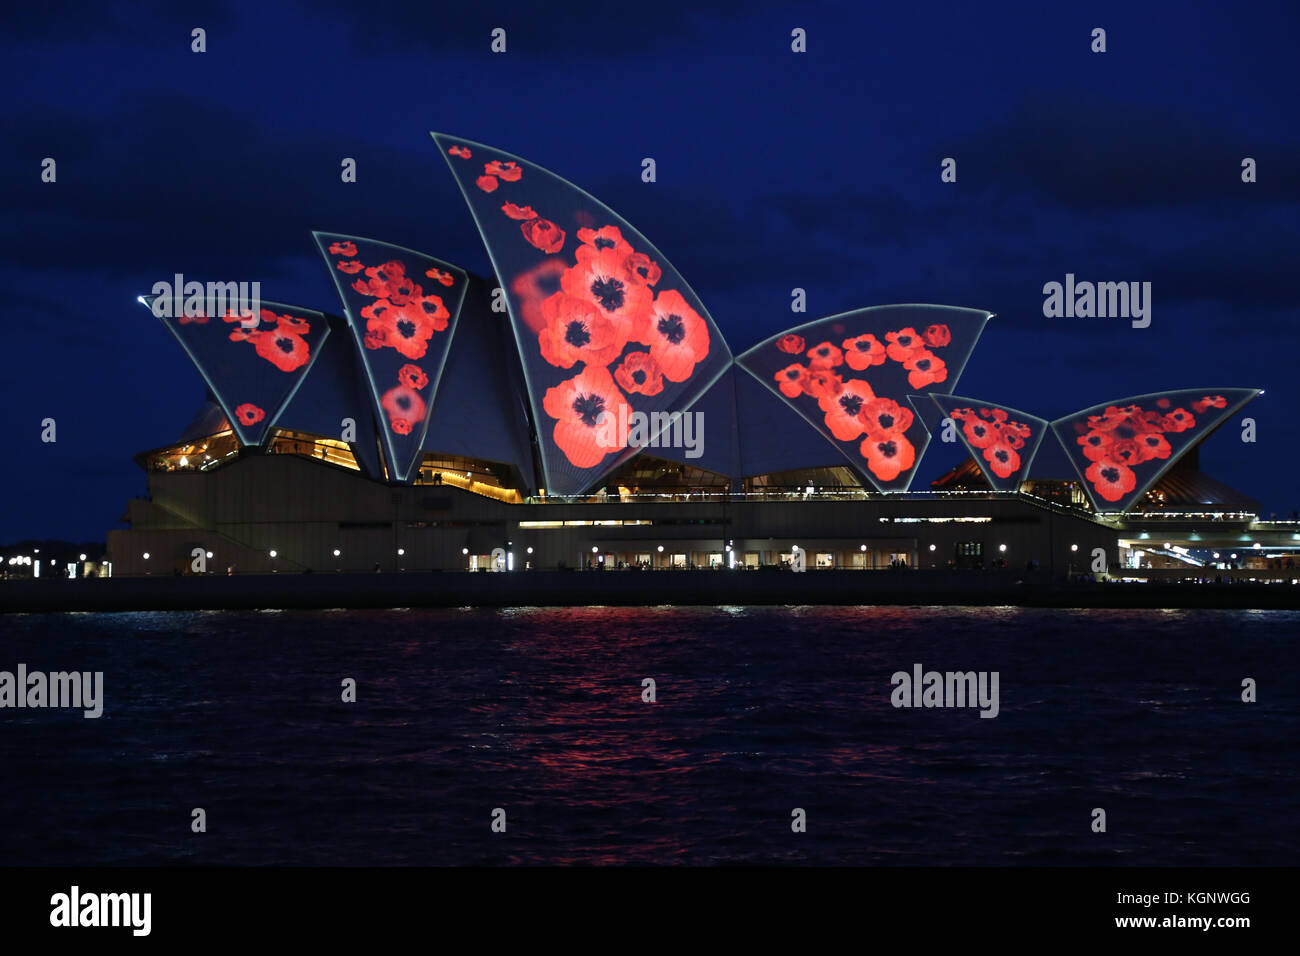 Sydney, Australia. 11th Nov, 2017. The sails of the Sydney Opera House light up with red poppies from 8pm to 1am to mark Remembrance Day and to commemorate the Centenary of Anzac. Minister for Veterans Affairs David Elliott said the projection of the Flanders poppy on to an iconic Australian landmark reinforces the respect and appreciation that the community has for our service personnel. Credit: Richard Milnes/Alamy Live News Stock Photo